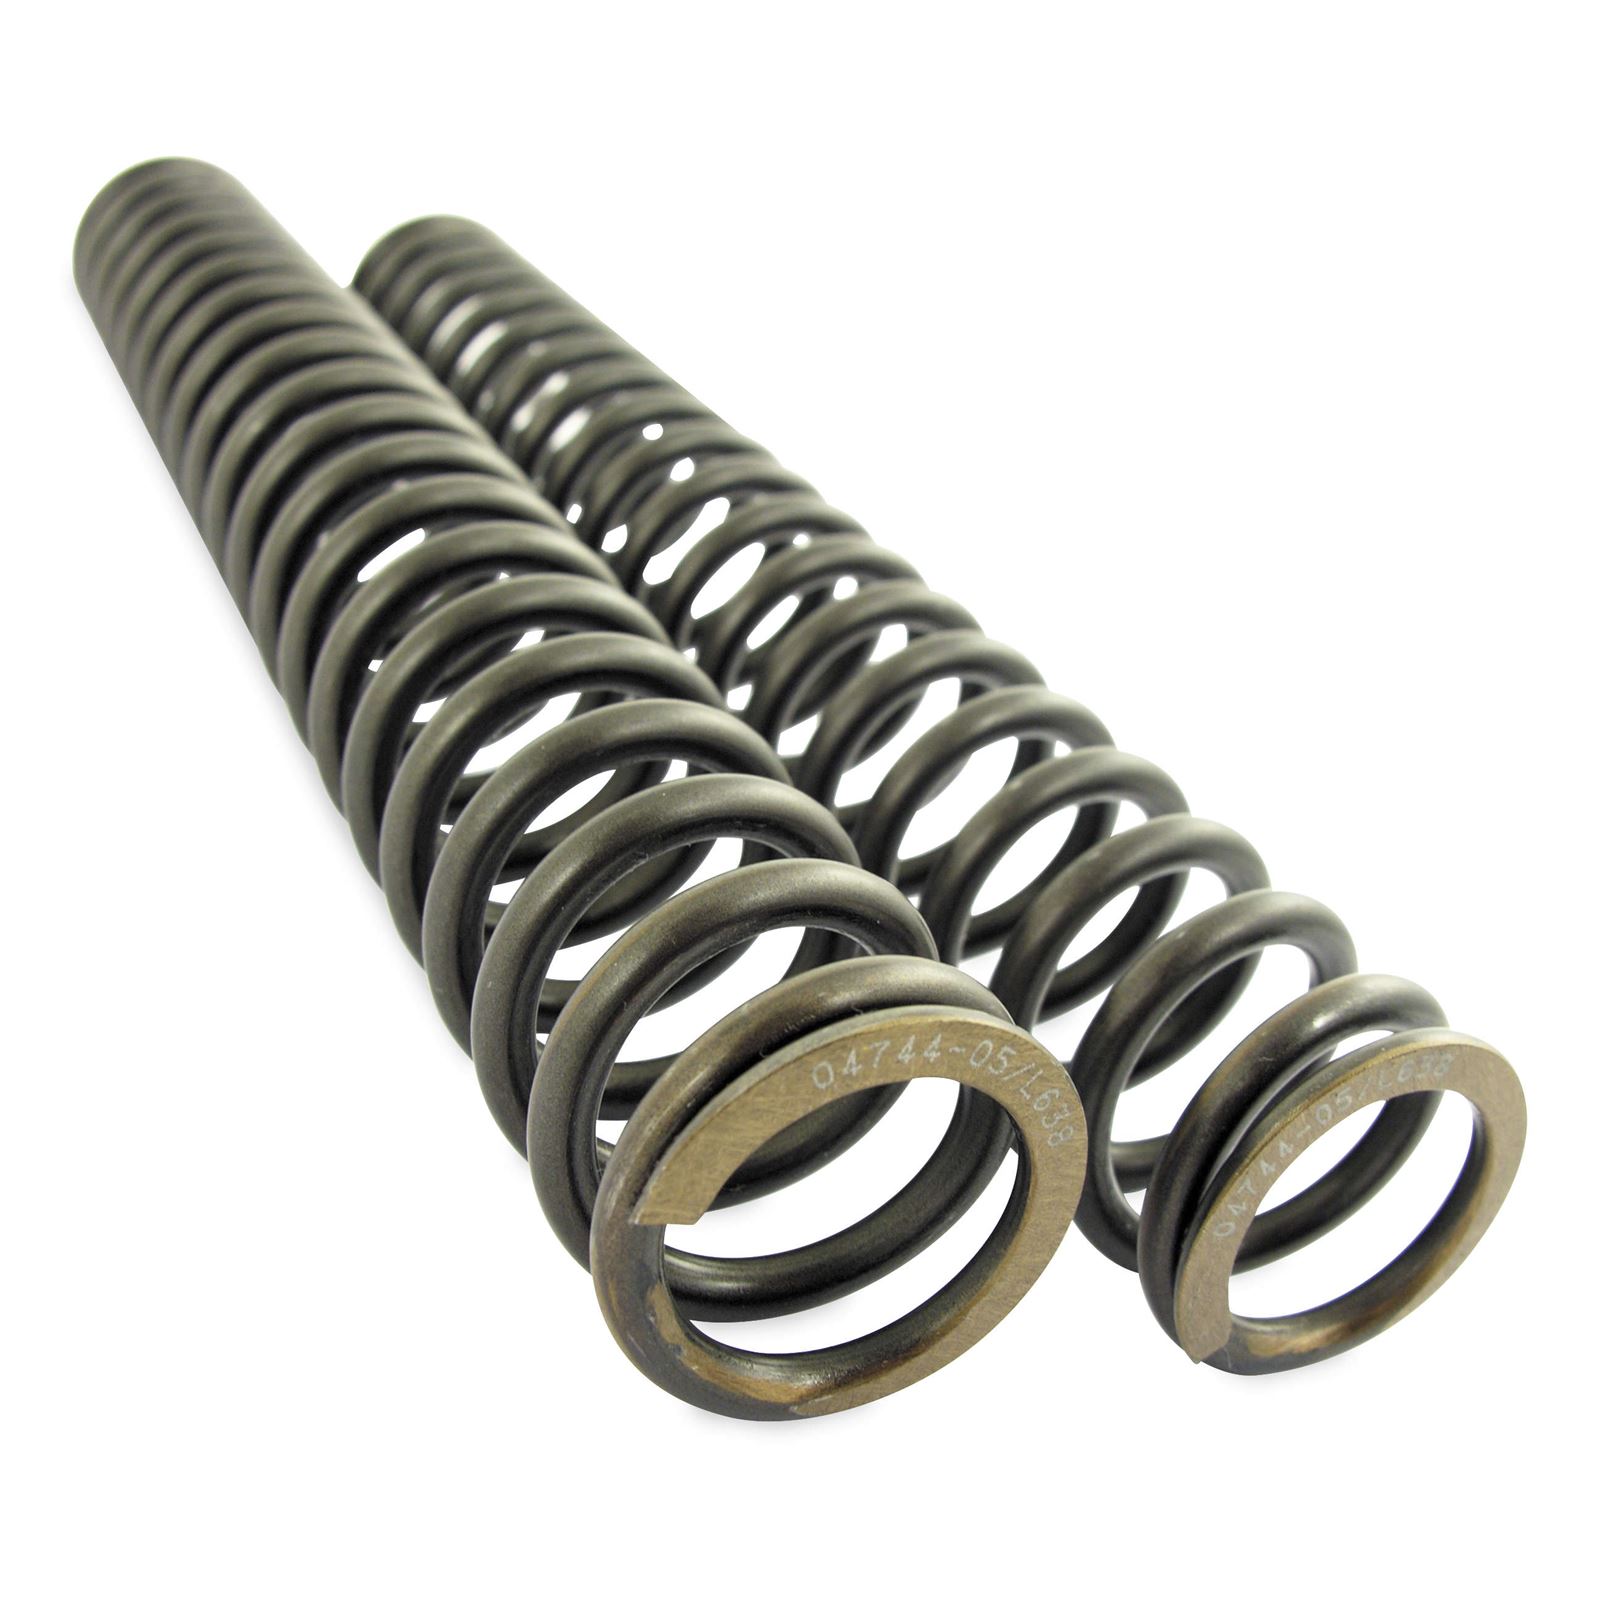 Ohlins Fork Springs for Adventure/ Touring - Spring Rate 9.0 Nmm